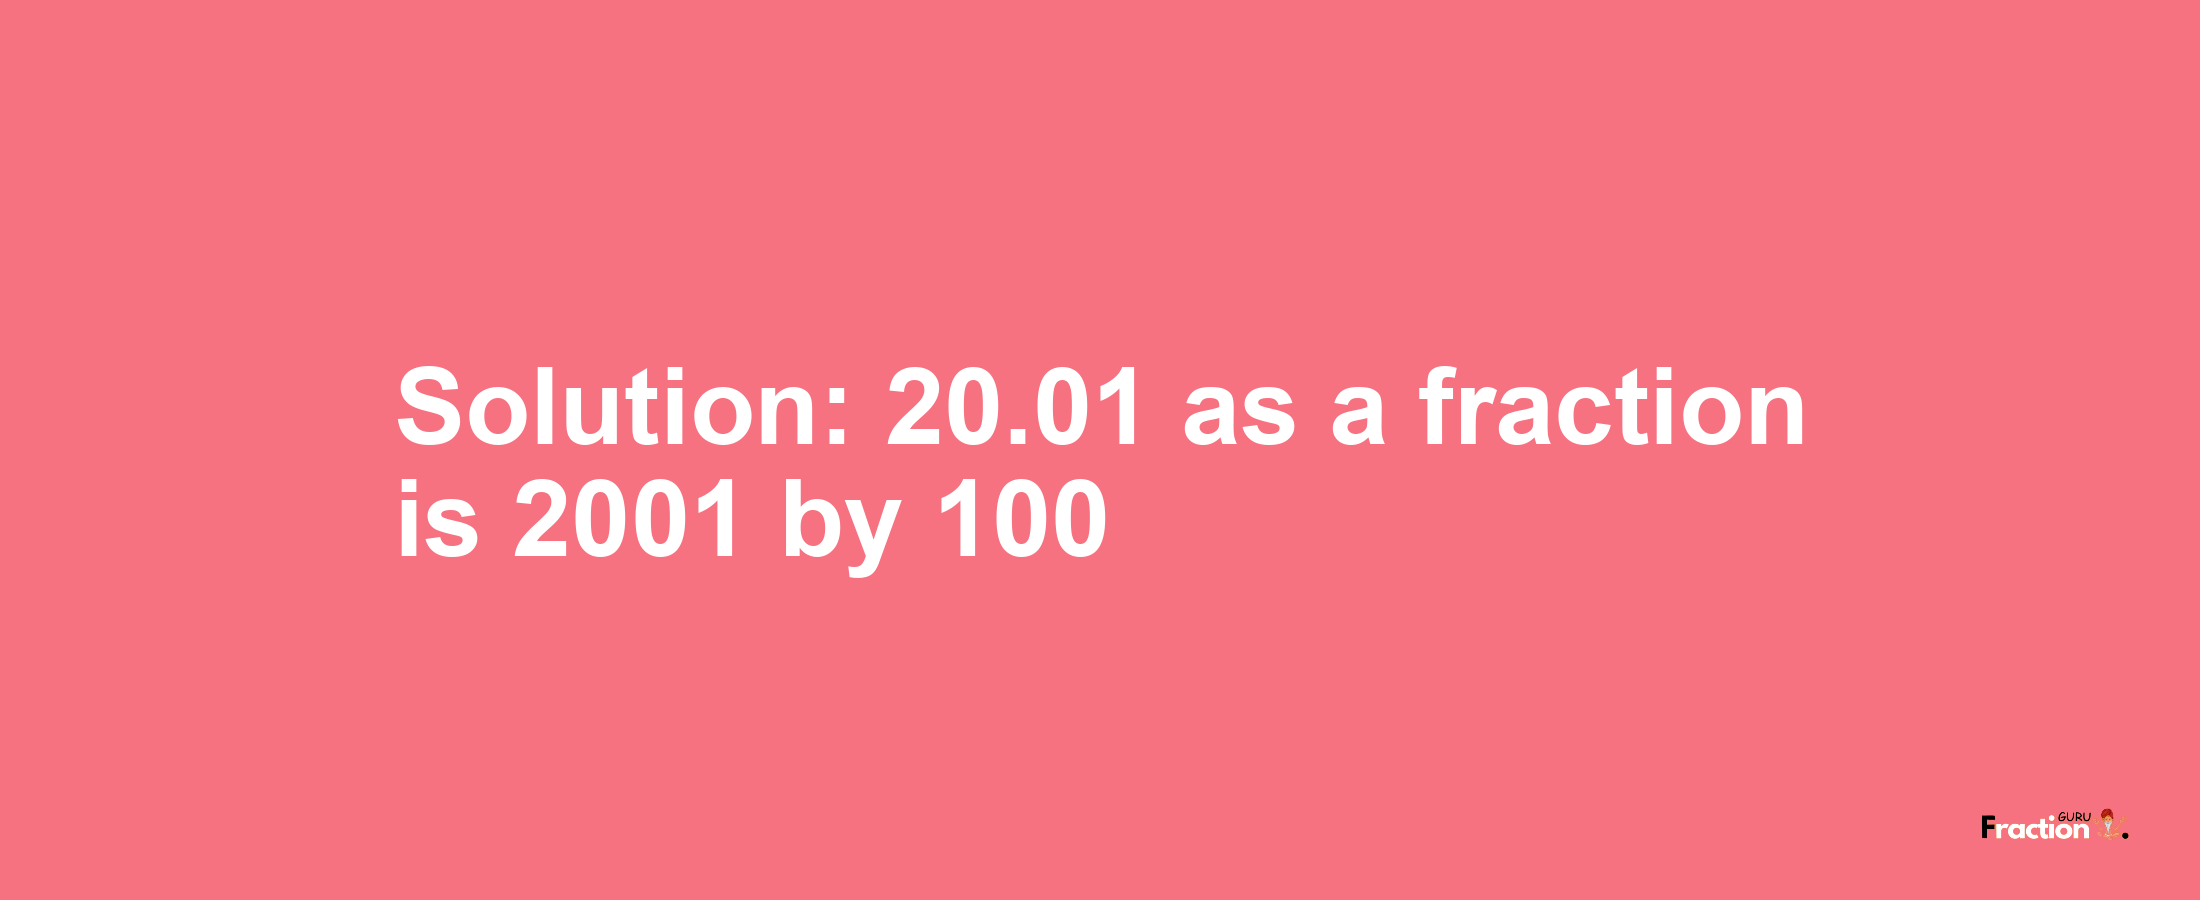 Solution:20.01 as a fraction is 2001/100